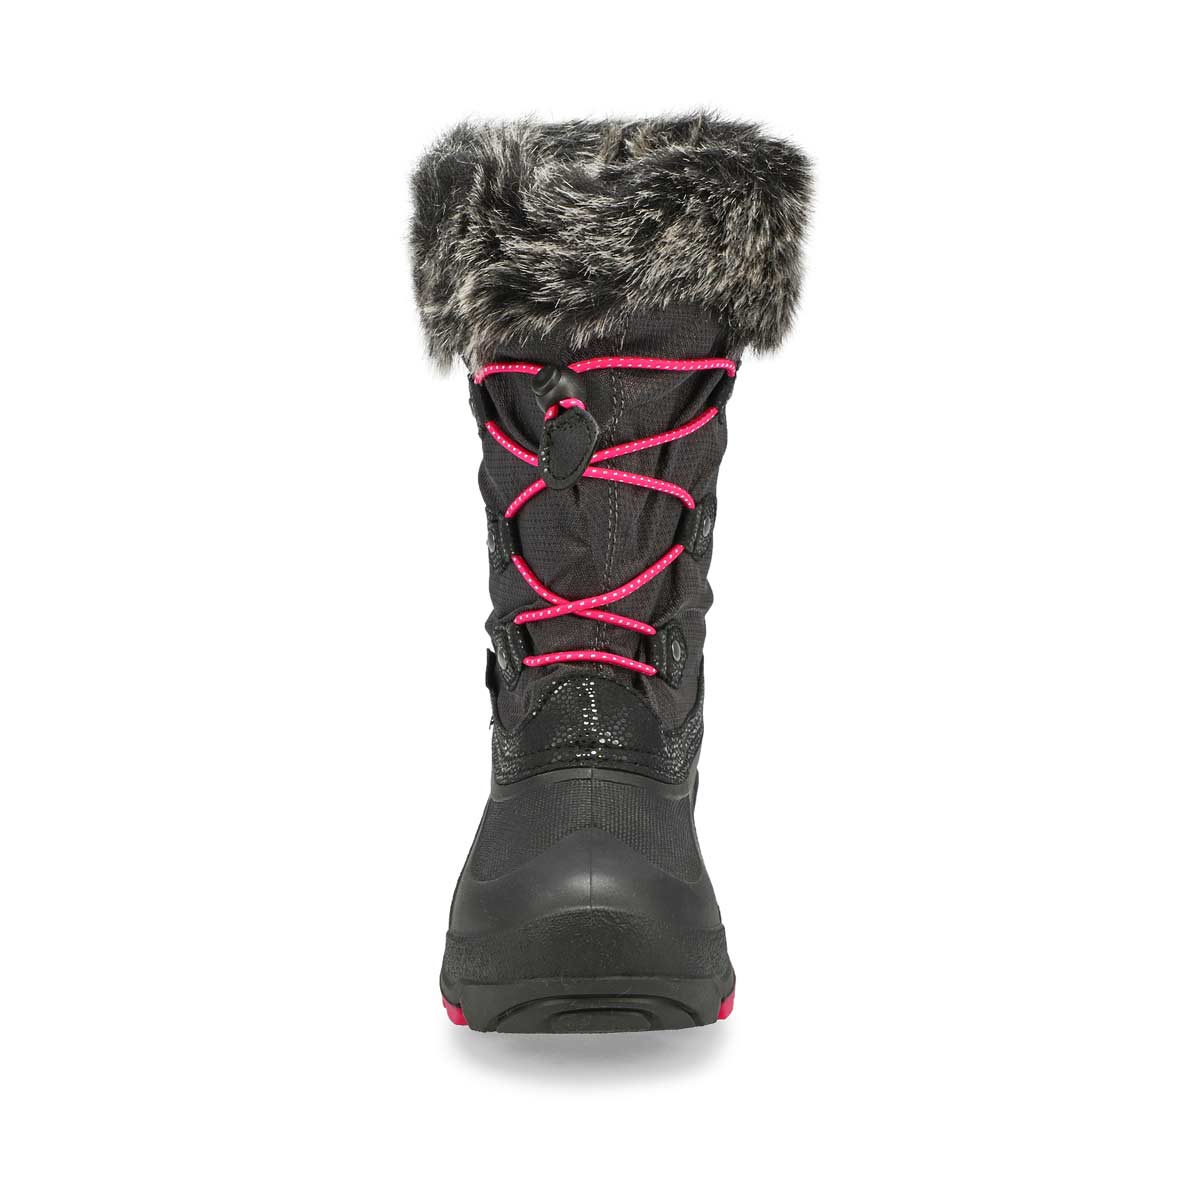 Botte d'hiver imp. POWDERY 2, anthracite, fille